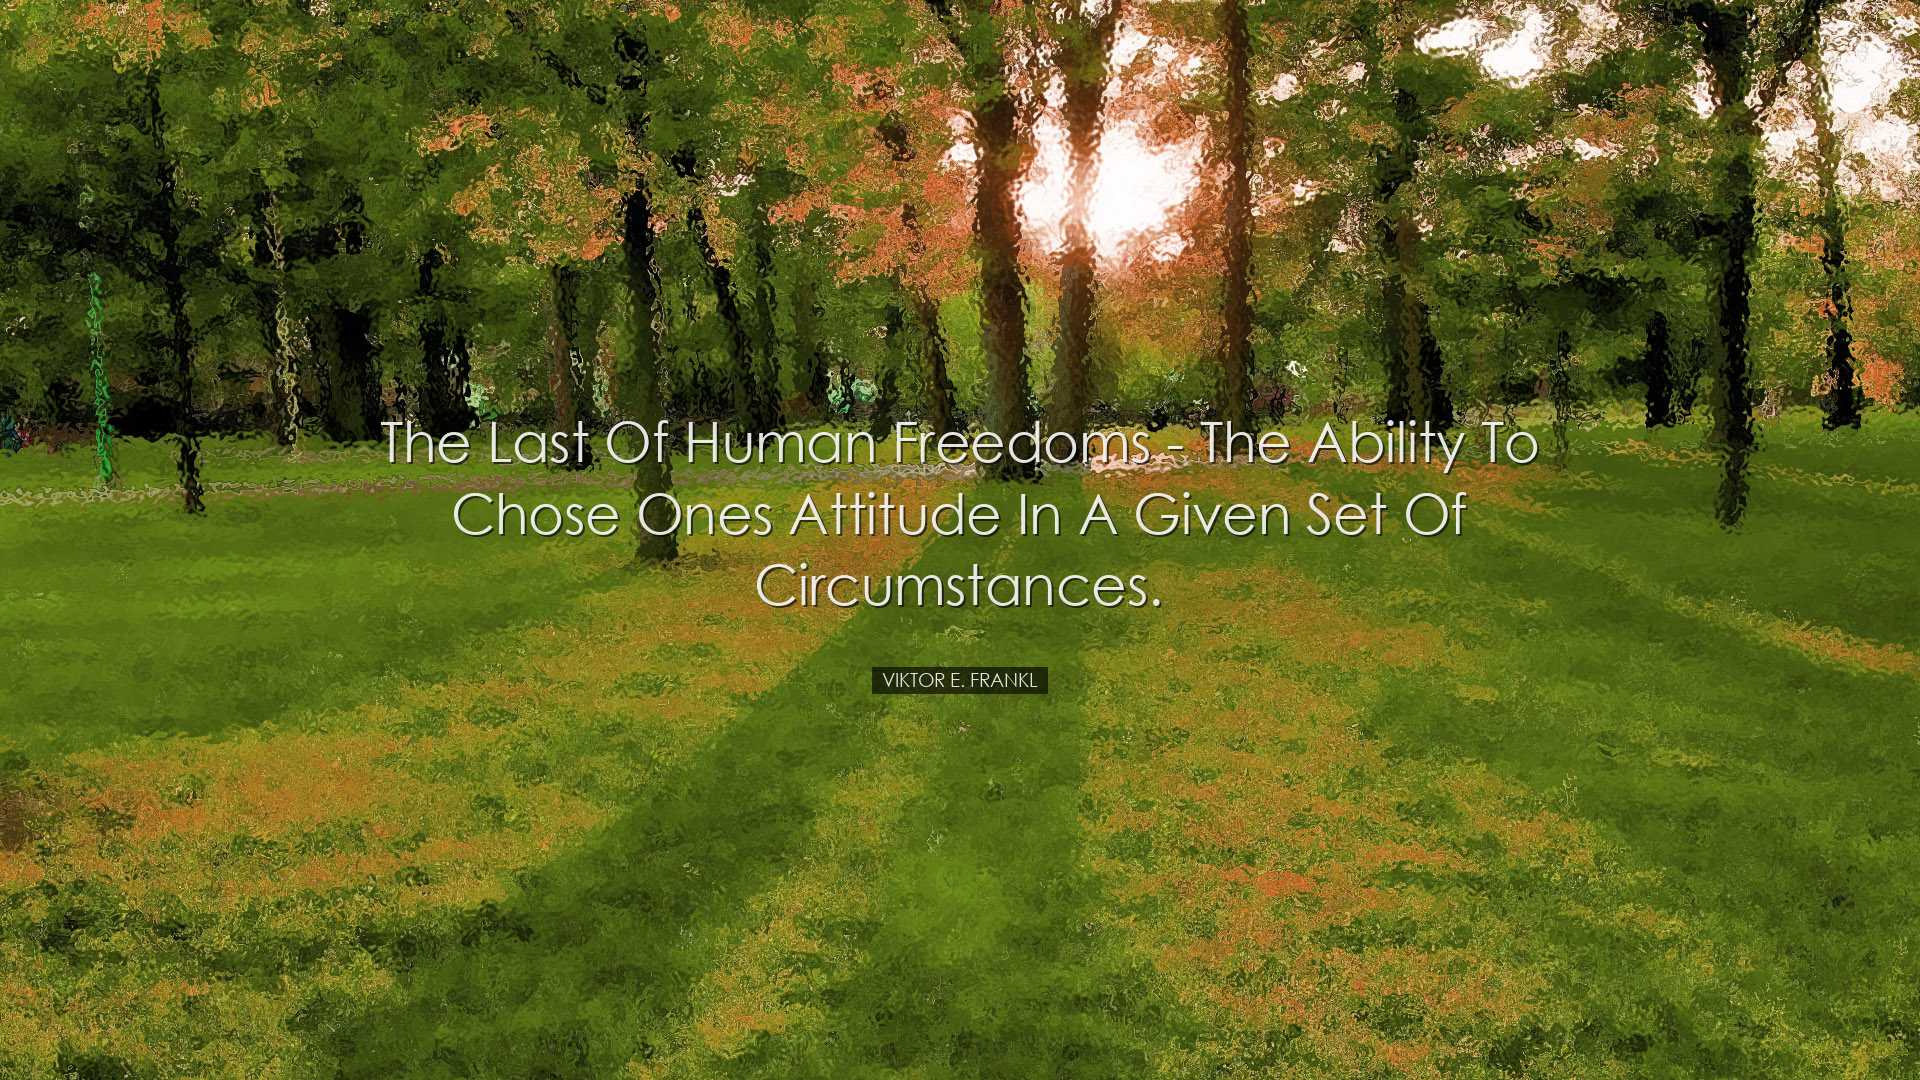 The last of human freedoms - the ability to chose ones attitude in